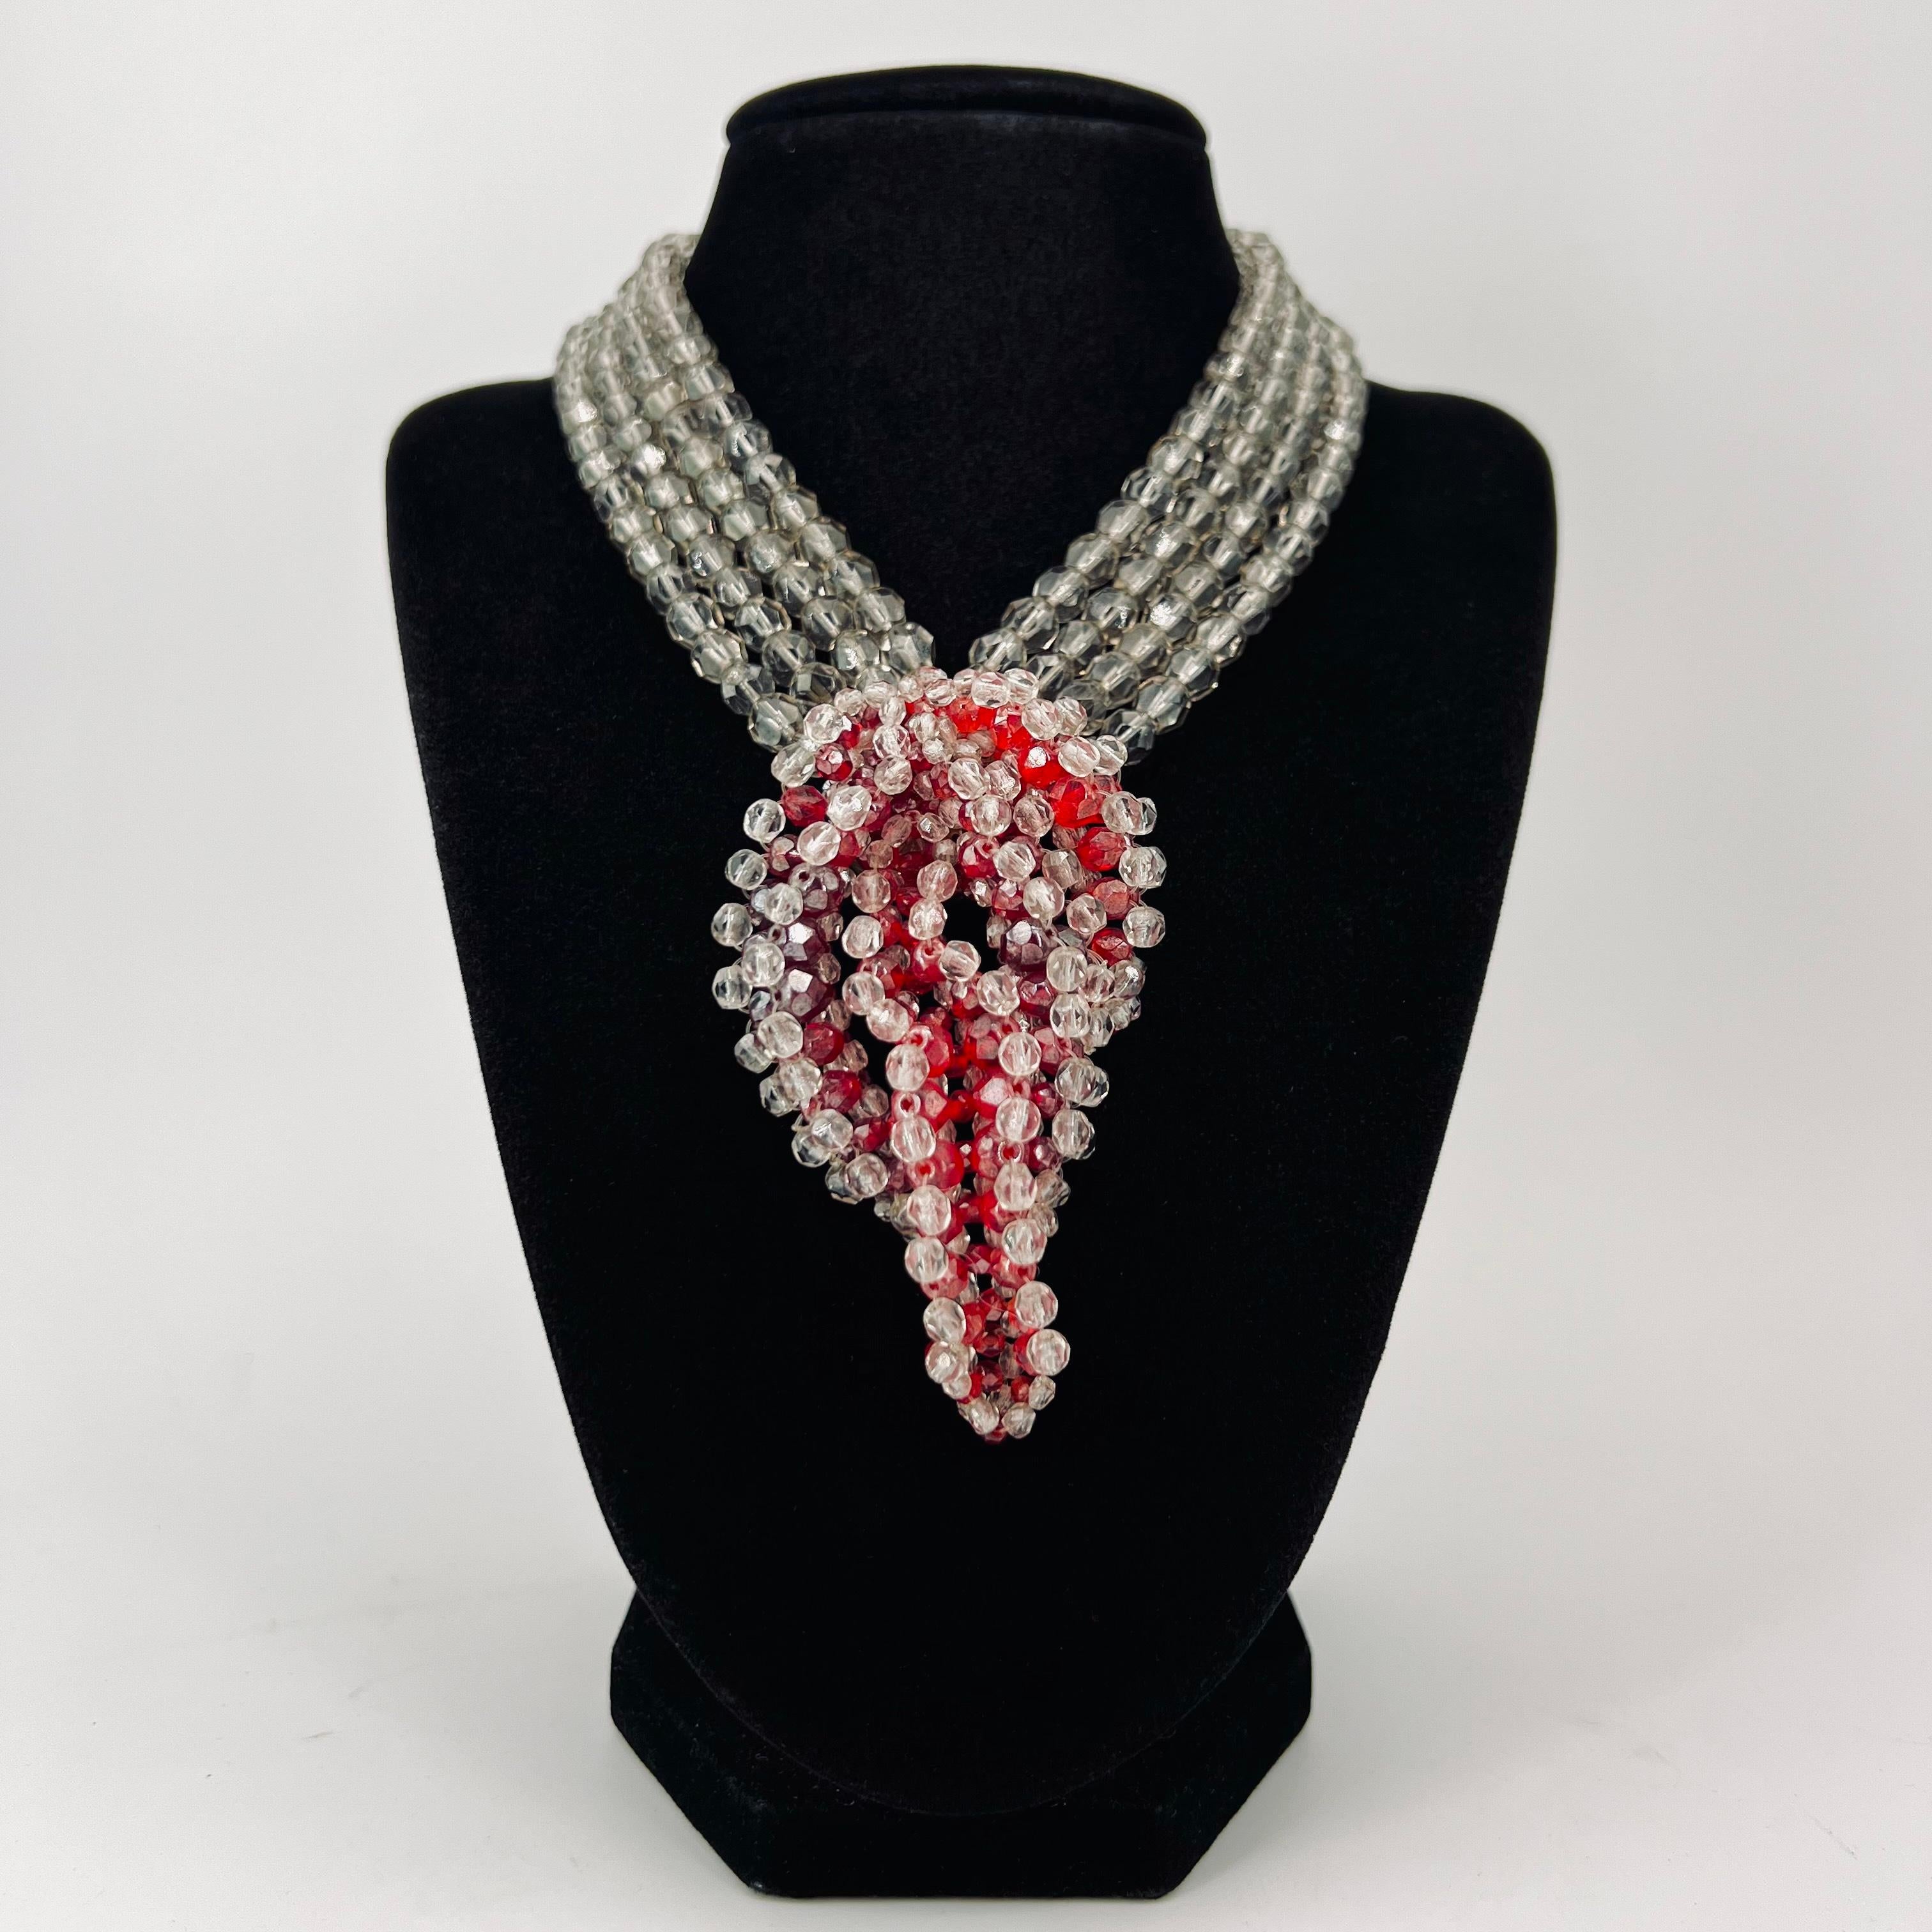 Statement Collar Necklace, with an intricate design of Smokey Crystal Beads with Shades of Deep Blood Red & Bright Red Crystal Beads Woven into a Sculpted Design. Coppola e Toppo Signature on the back of the clasp: Made in Italy by Coppola e Toppo.